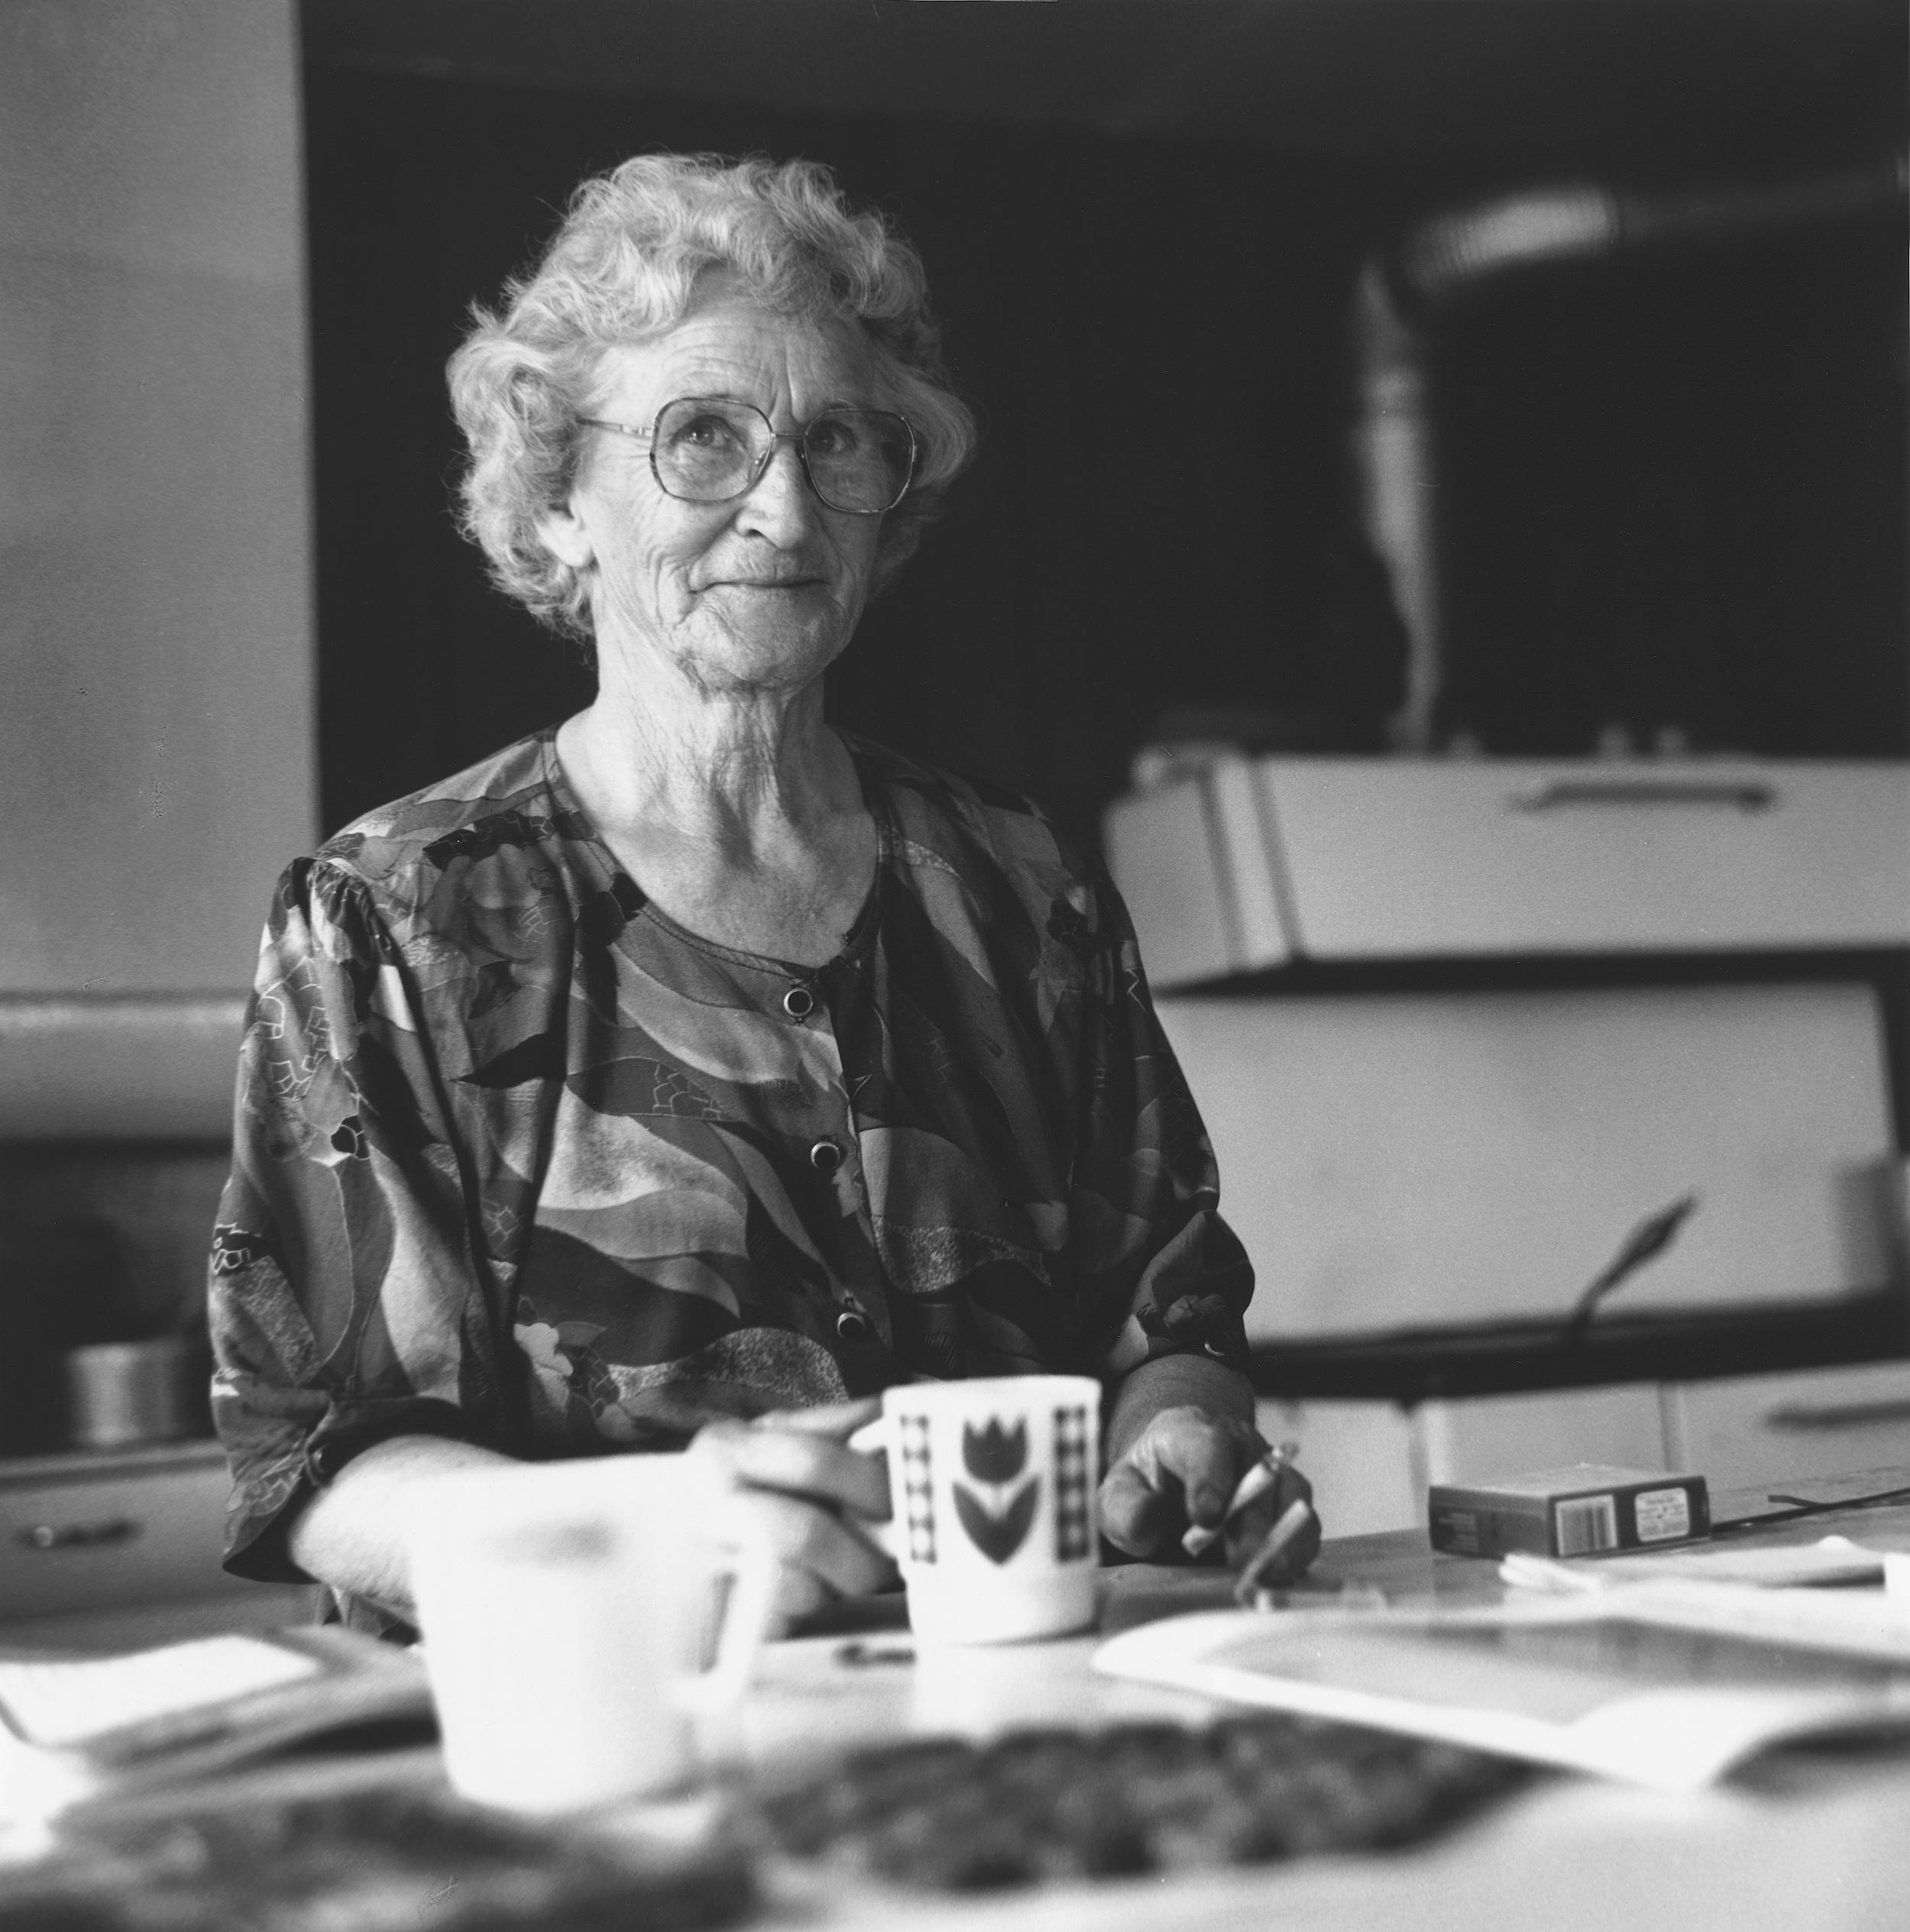 Black and white photo of elderly woman sitting at a table smiling. There are papers and coffee mugs on the table.